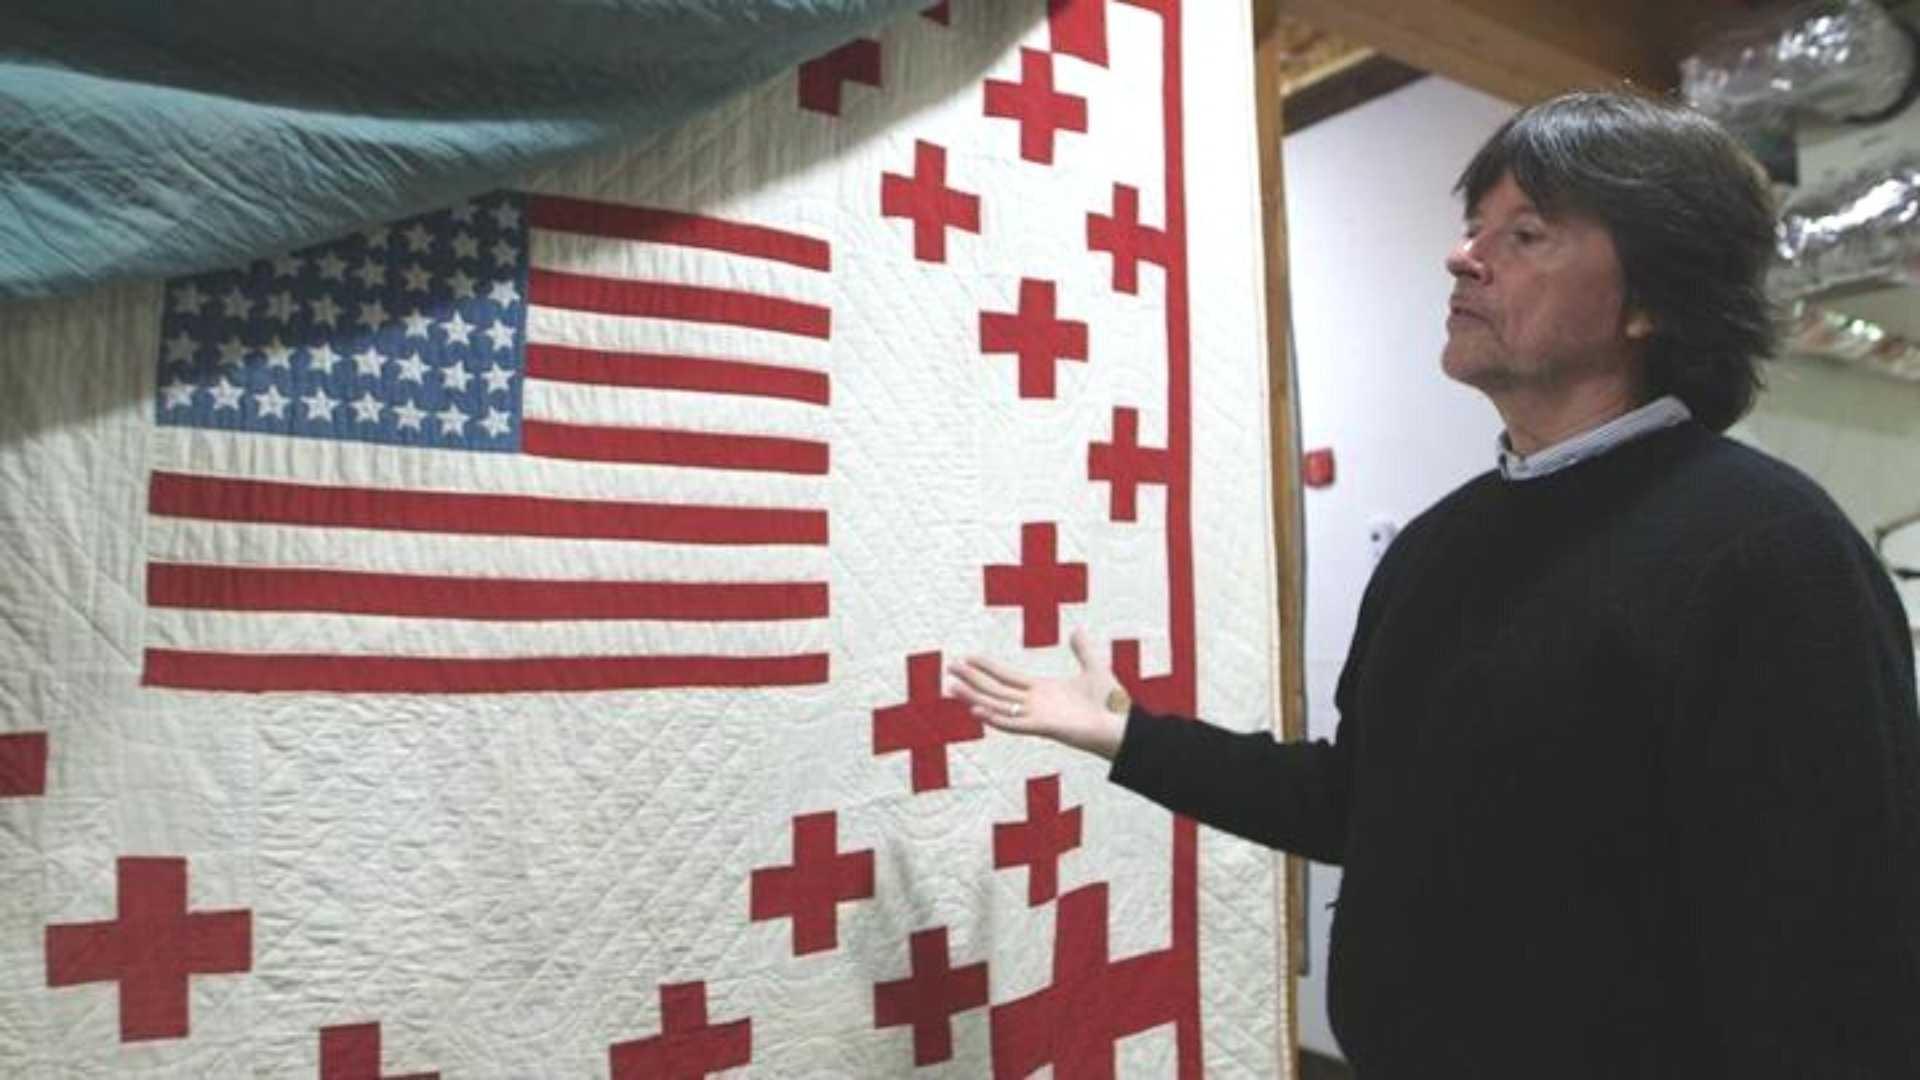 Ken Burns stands near and gestures towards a quilt from his collection.